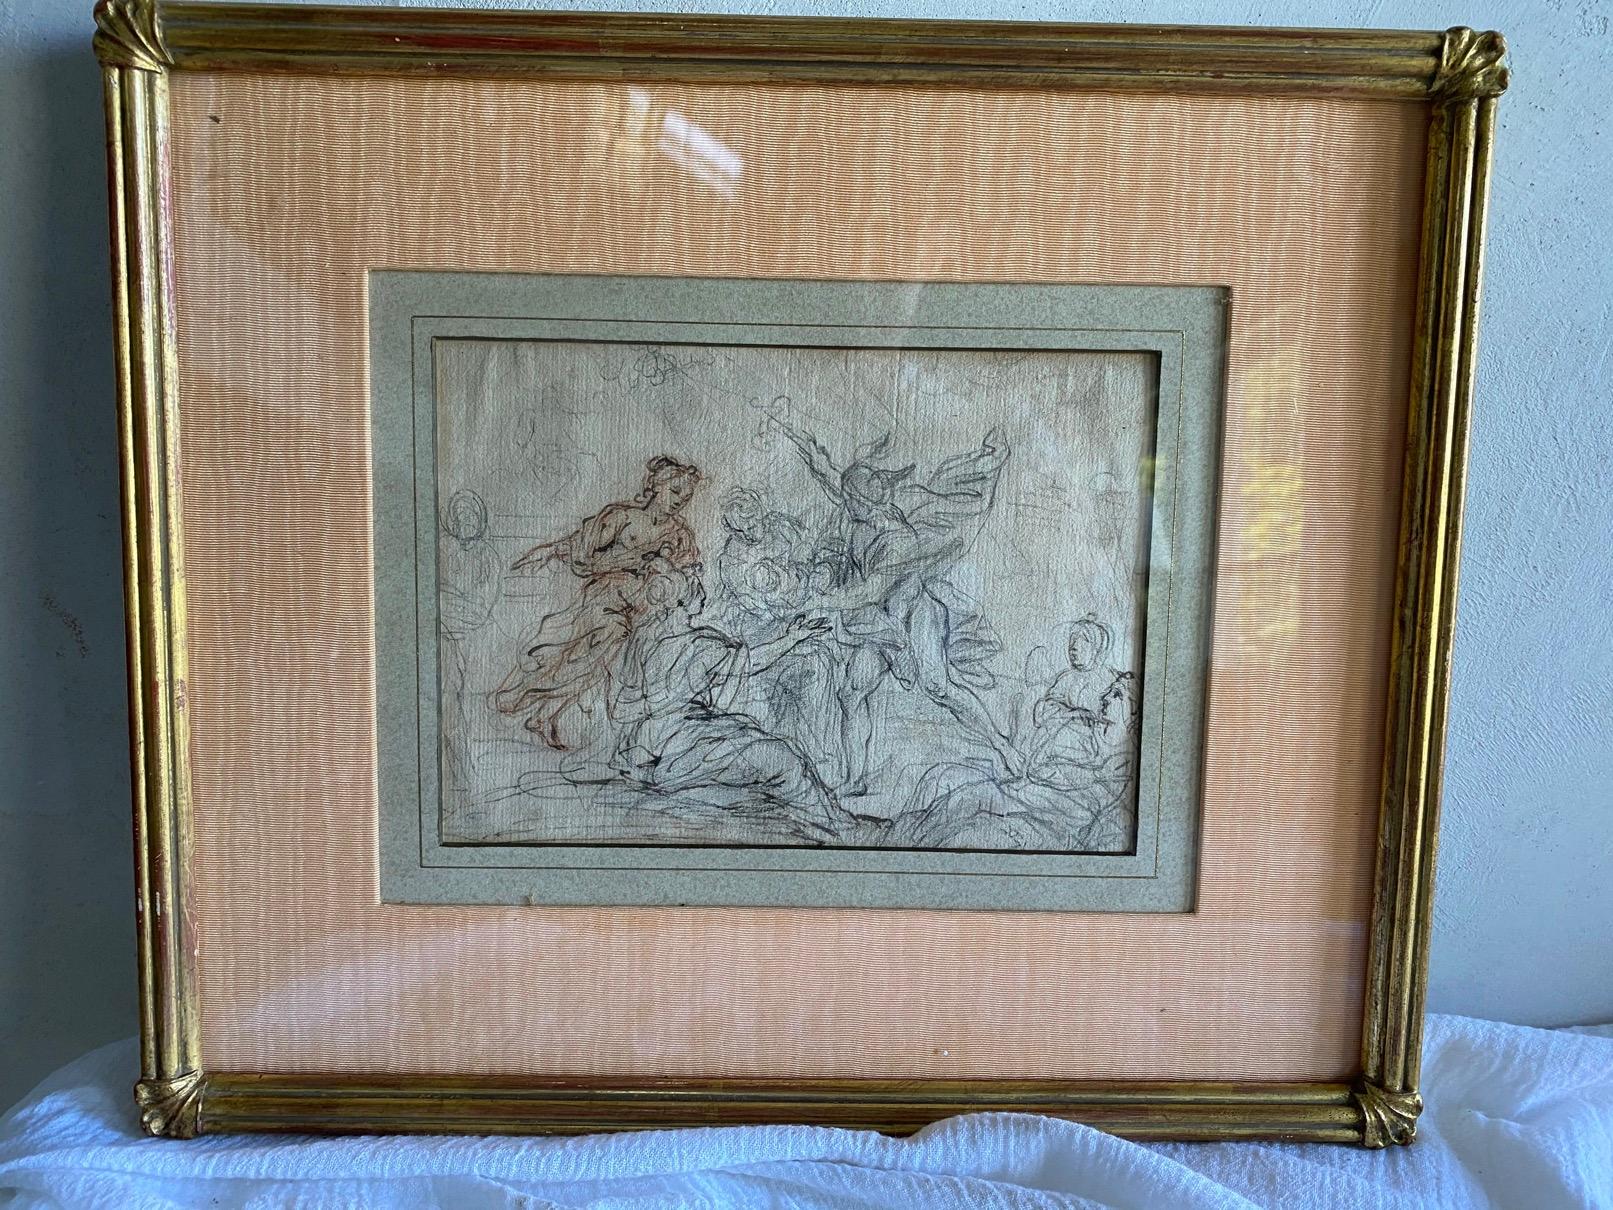 18th century French study of a painting of an allegory. Gold giltwood frame with salmon color moiré fabric around matting. Drawing measures 6